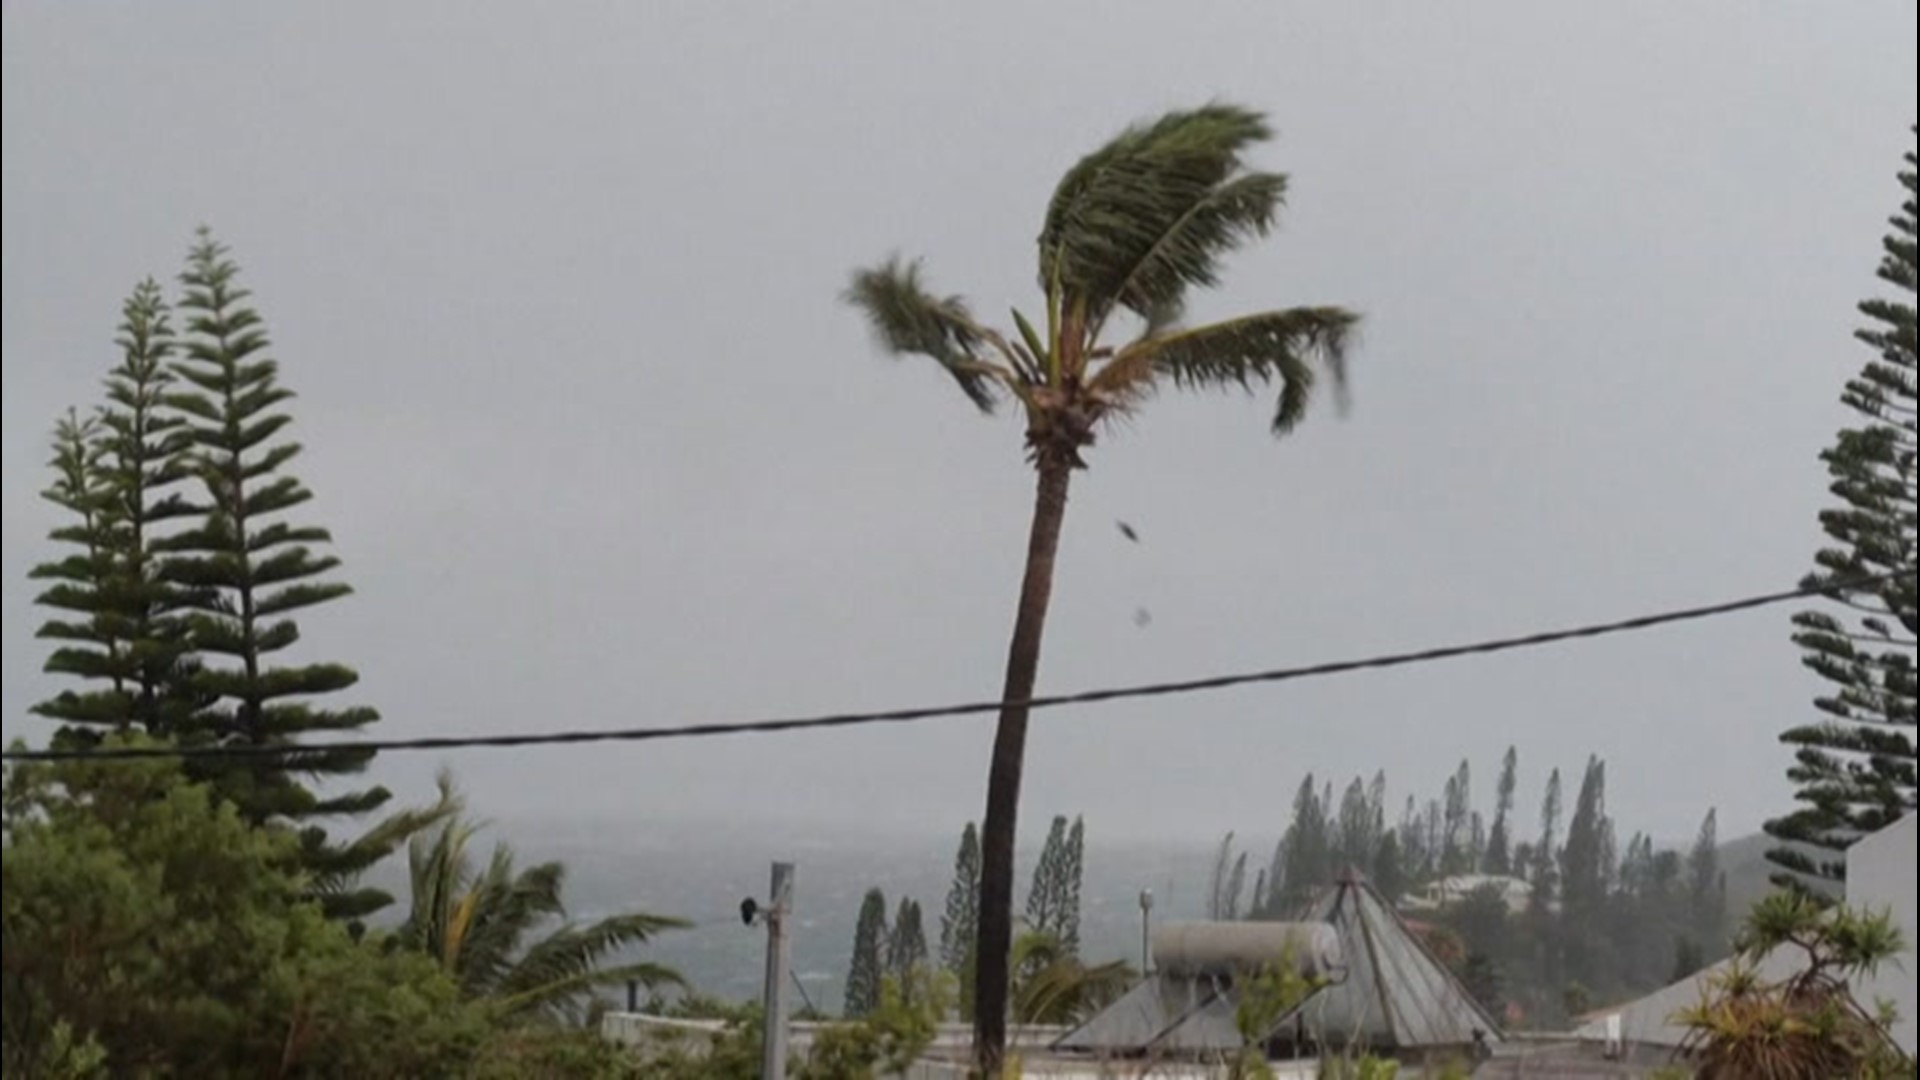 Strong winds blew through Noumea, New Caledonia, as a level-2 hurricane alert was issued for Cyclone Niran on March 6.